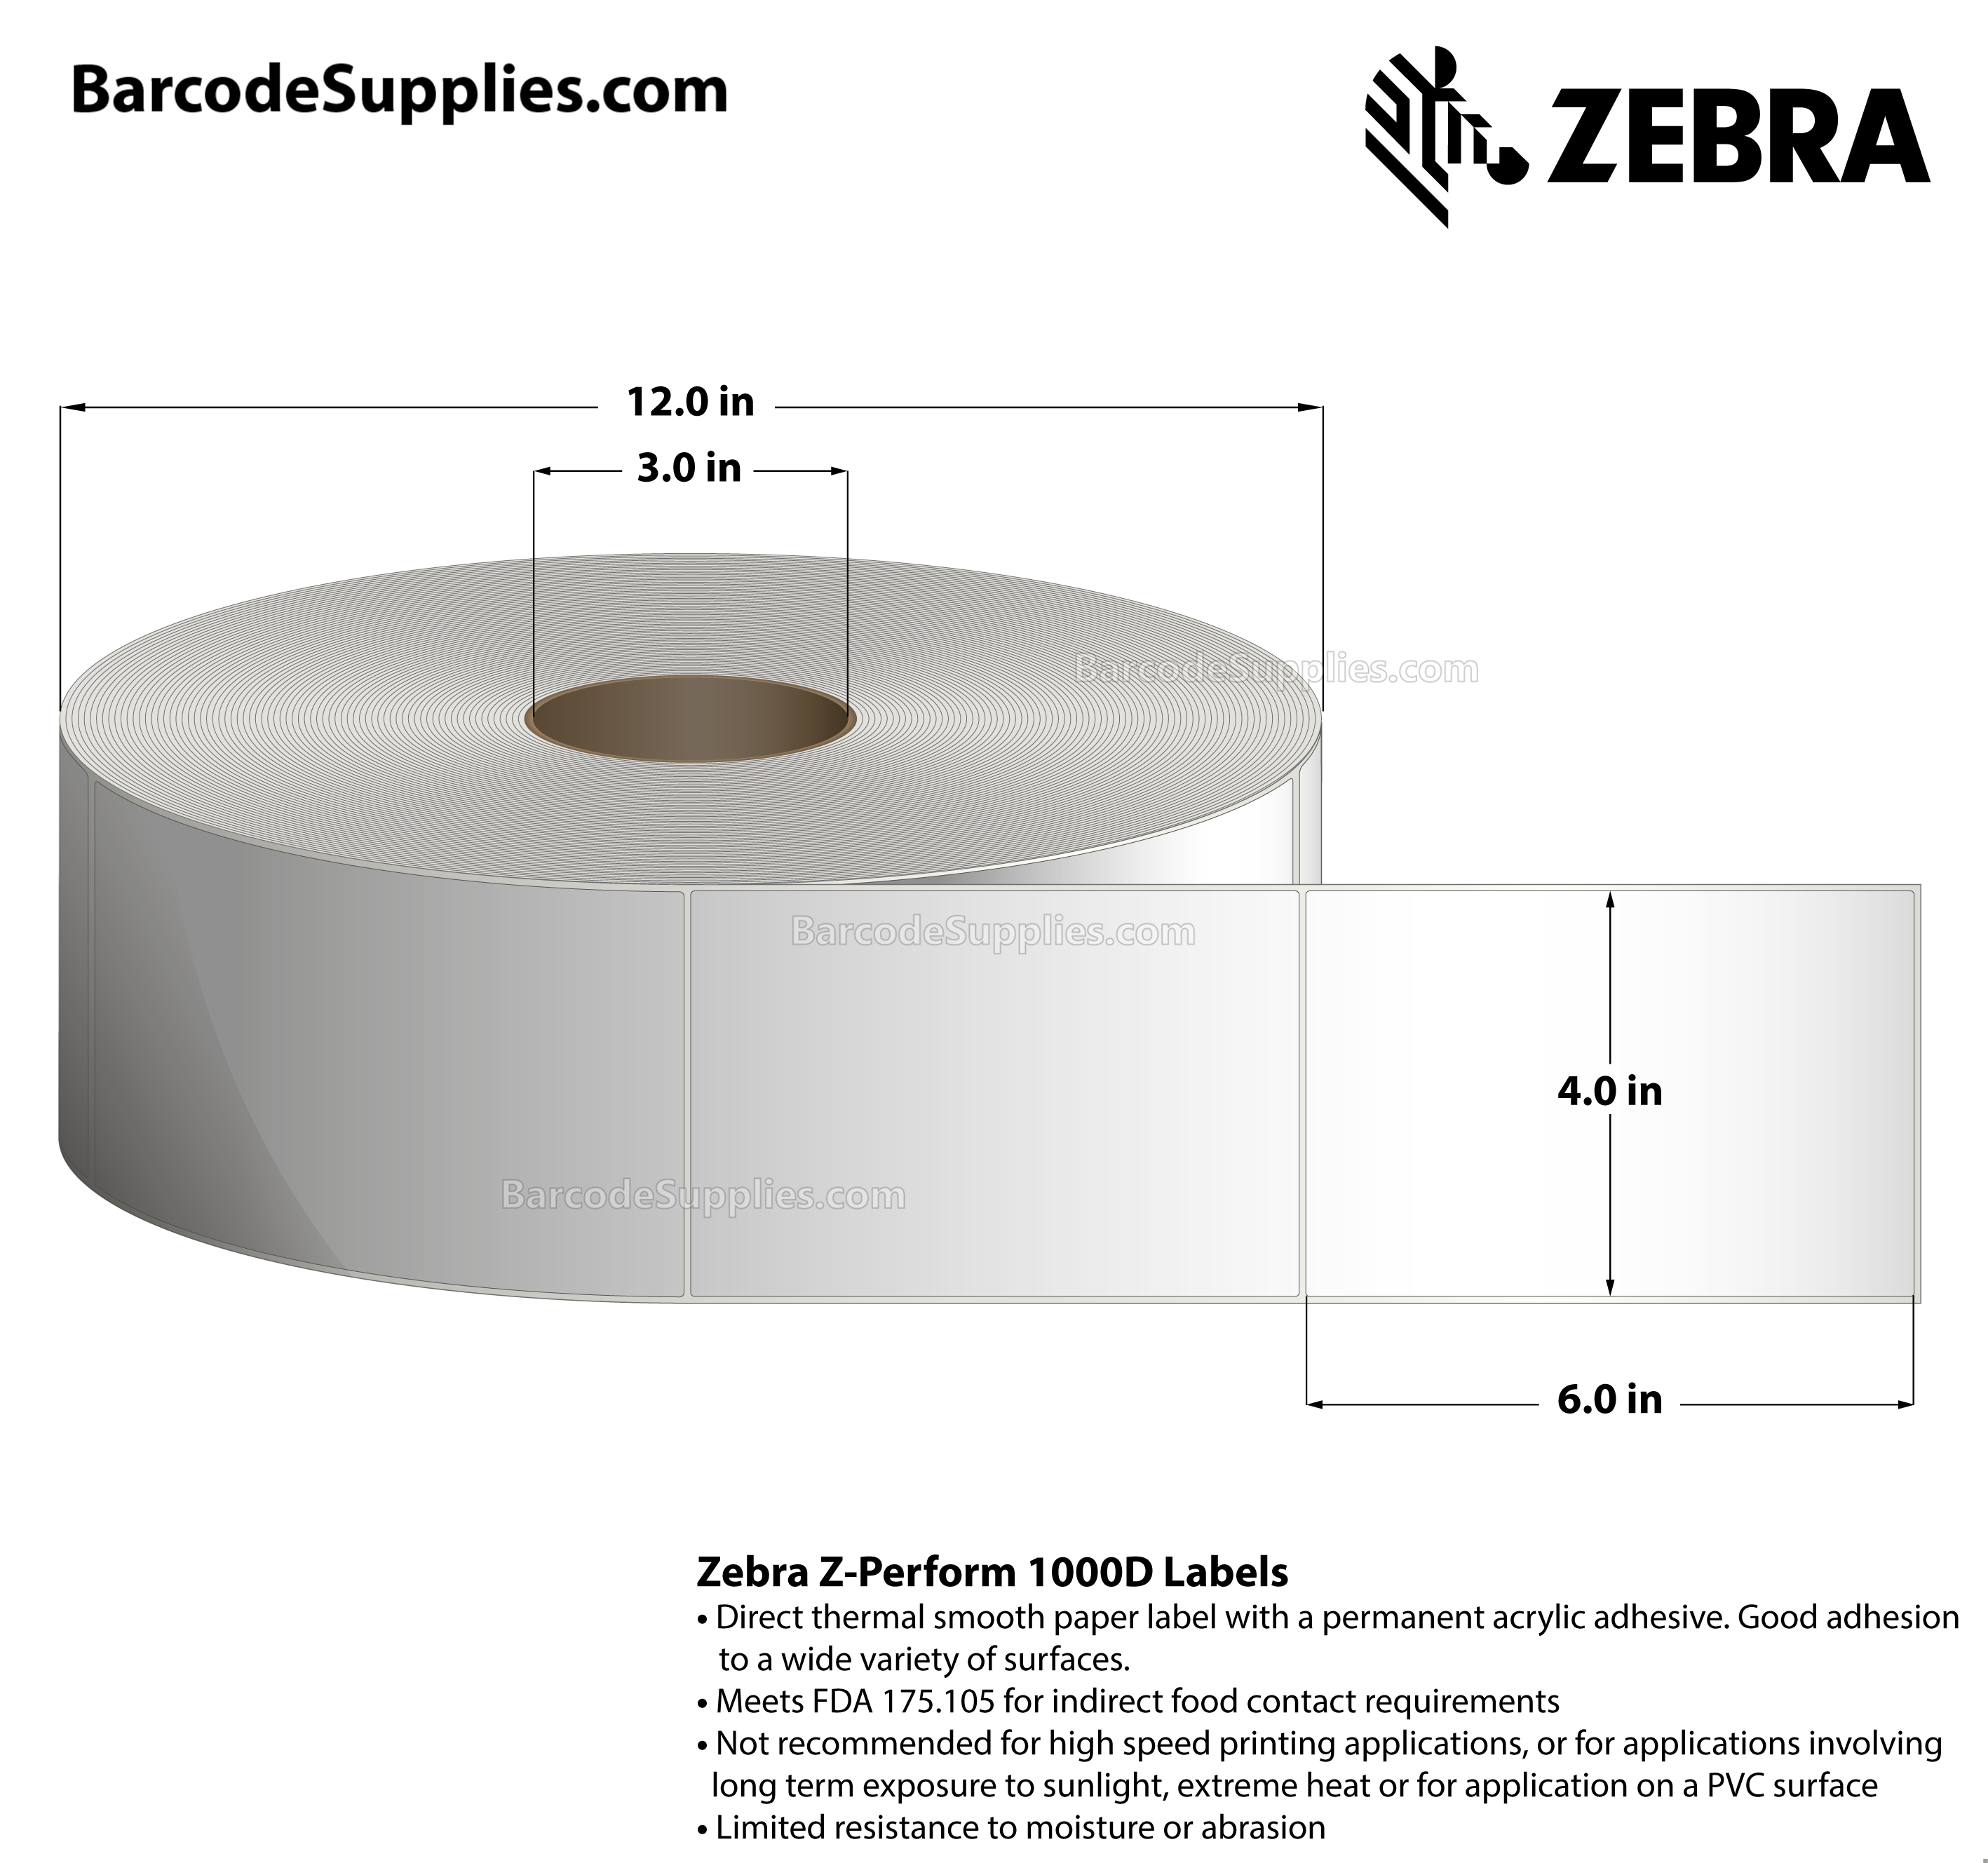 4 x 6 Direct Thermal White Z-Perform 1000D Labels With Permanent Adhesive - Meets FDA 175.105 indirect food contact requirements. - Not Perforated - 2500 Labels Per Roll - Carton Of 2 Rolls - 5000 Labels Total - MPN: 10026037